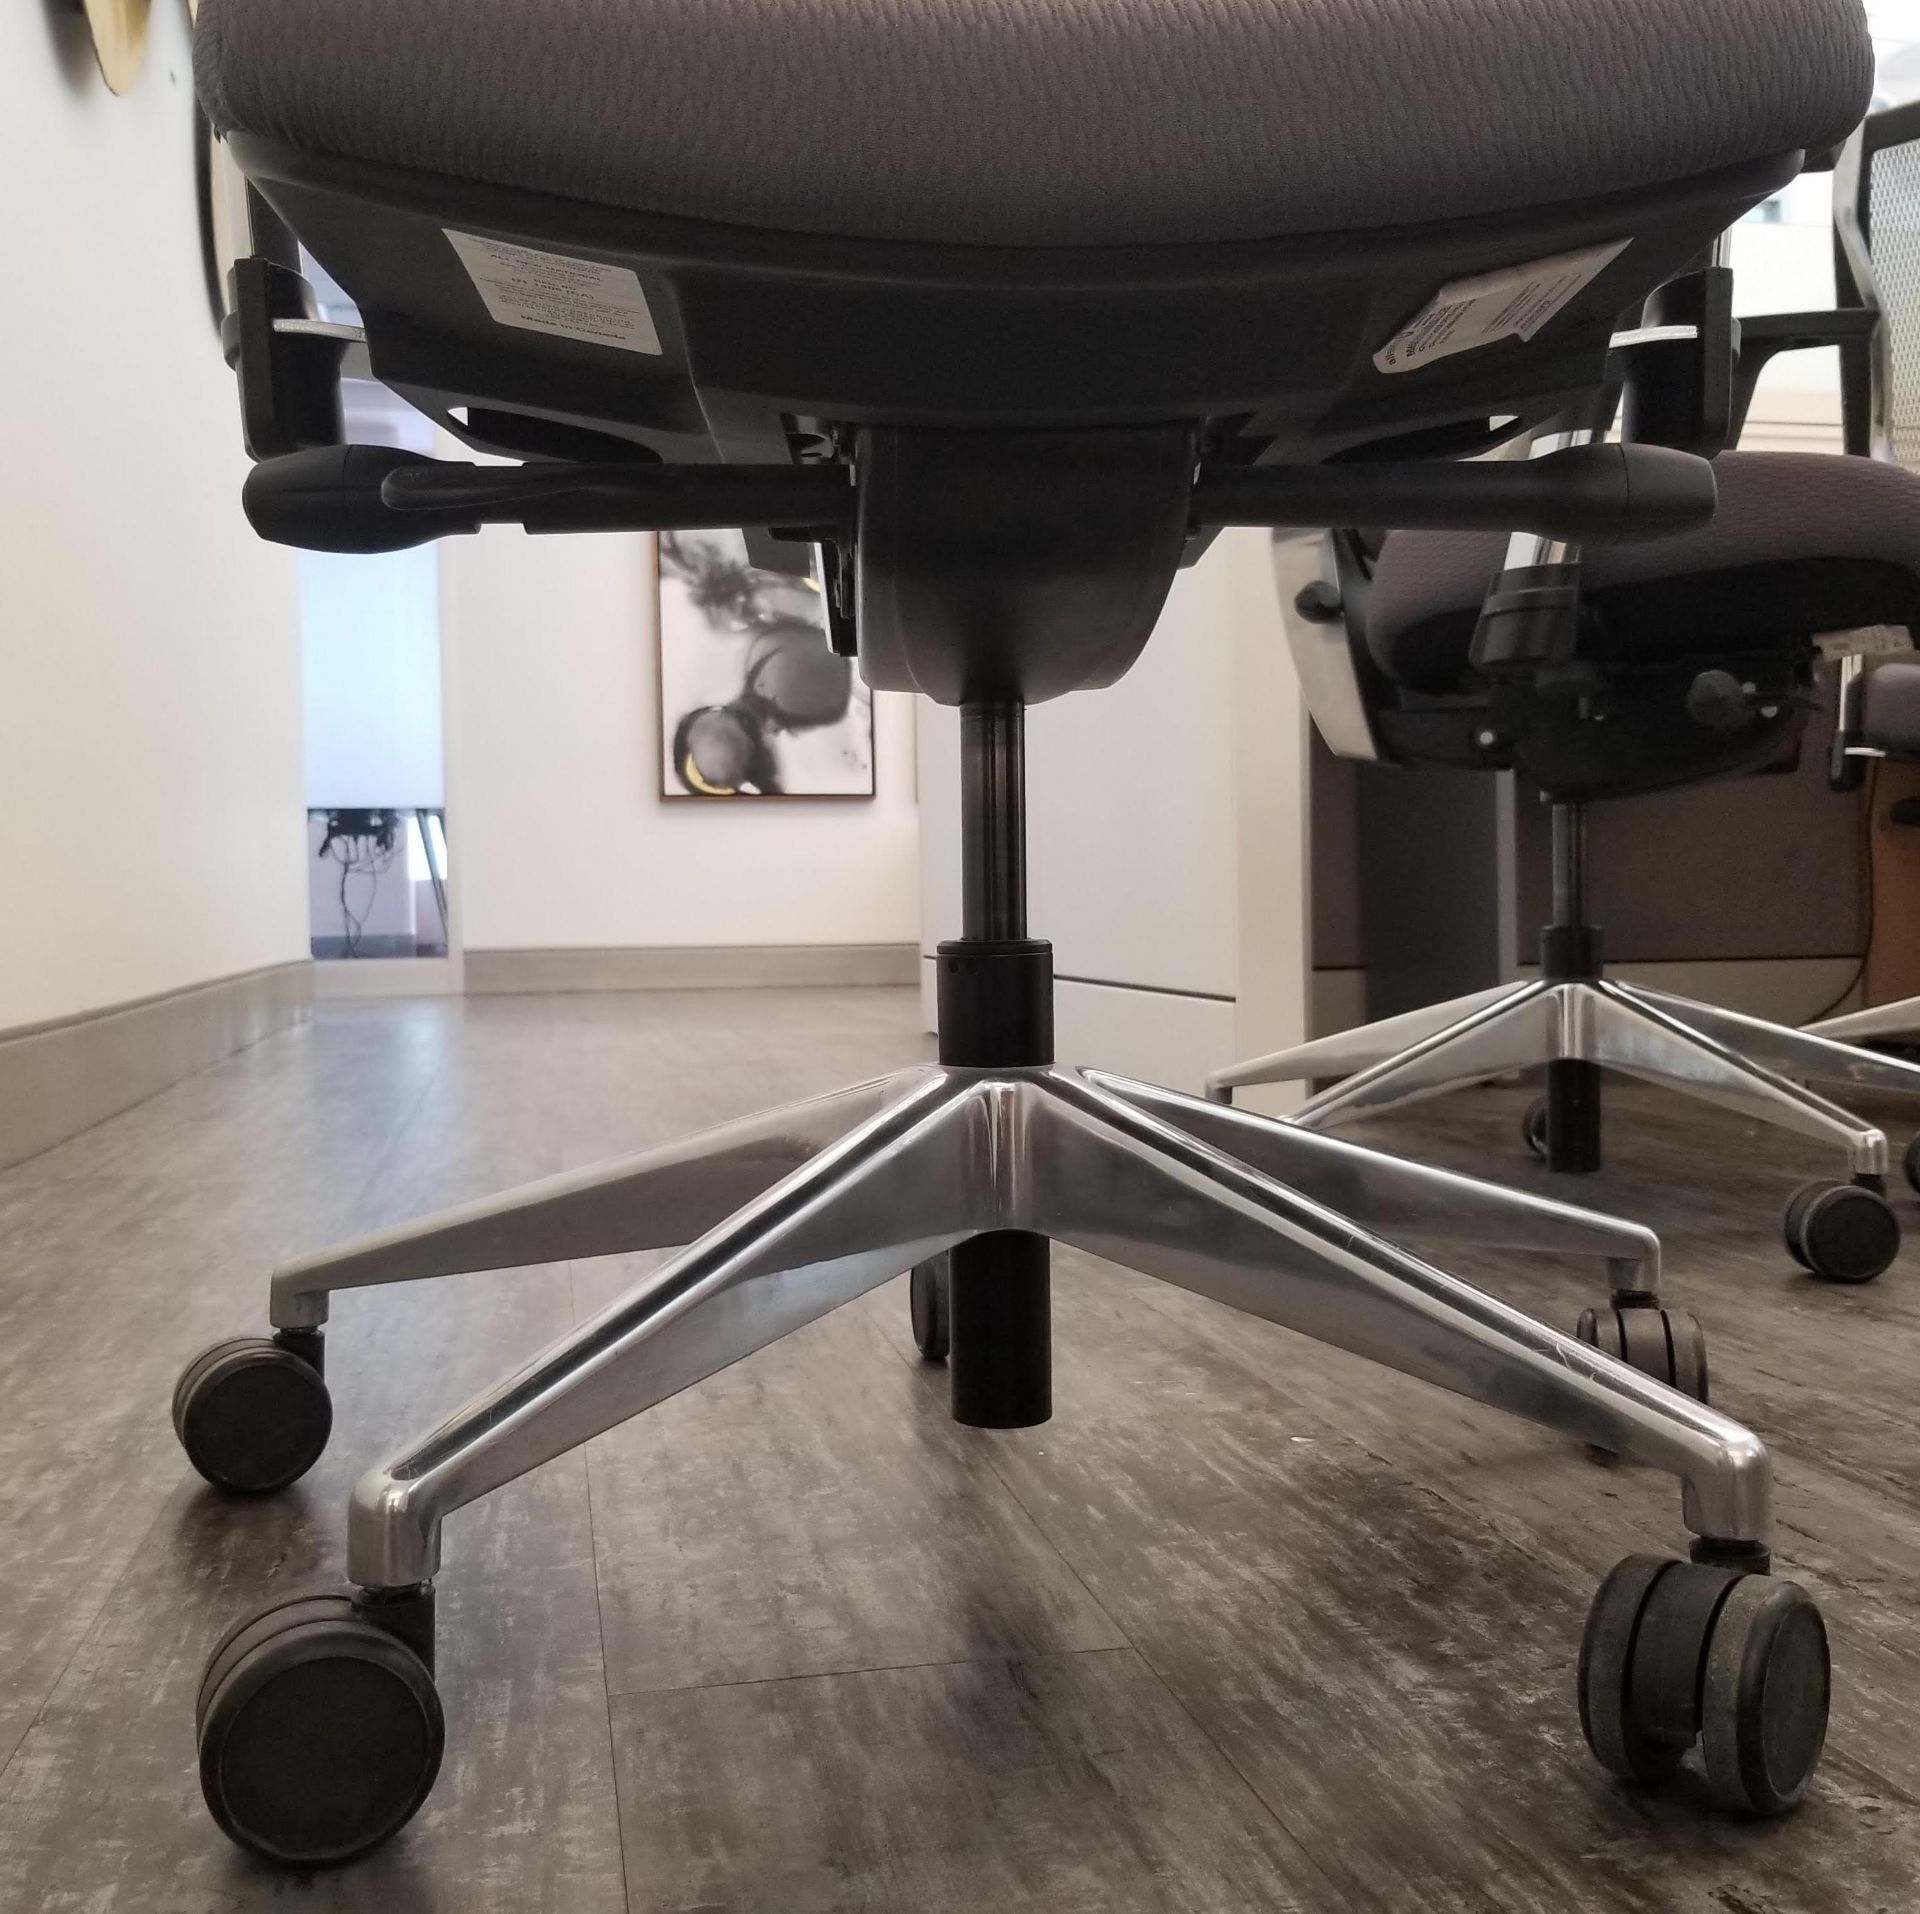 ALLSEATING - EXEC. CHAIR ON CASTERS, GREY W/ MESH BACK, ADJUSTABLE HEIGHT, ADJUSTABLE ARMS - Image 5 of 7